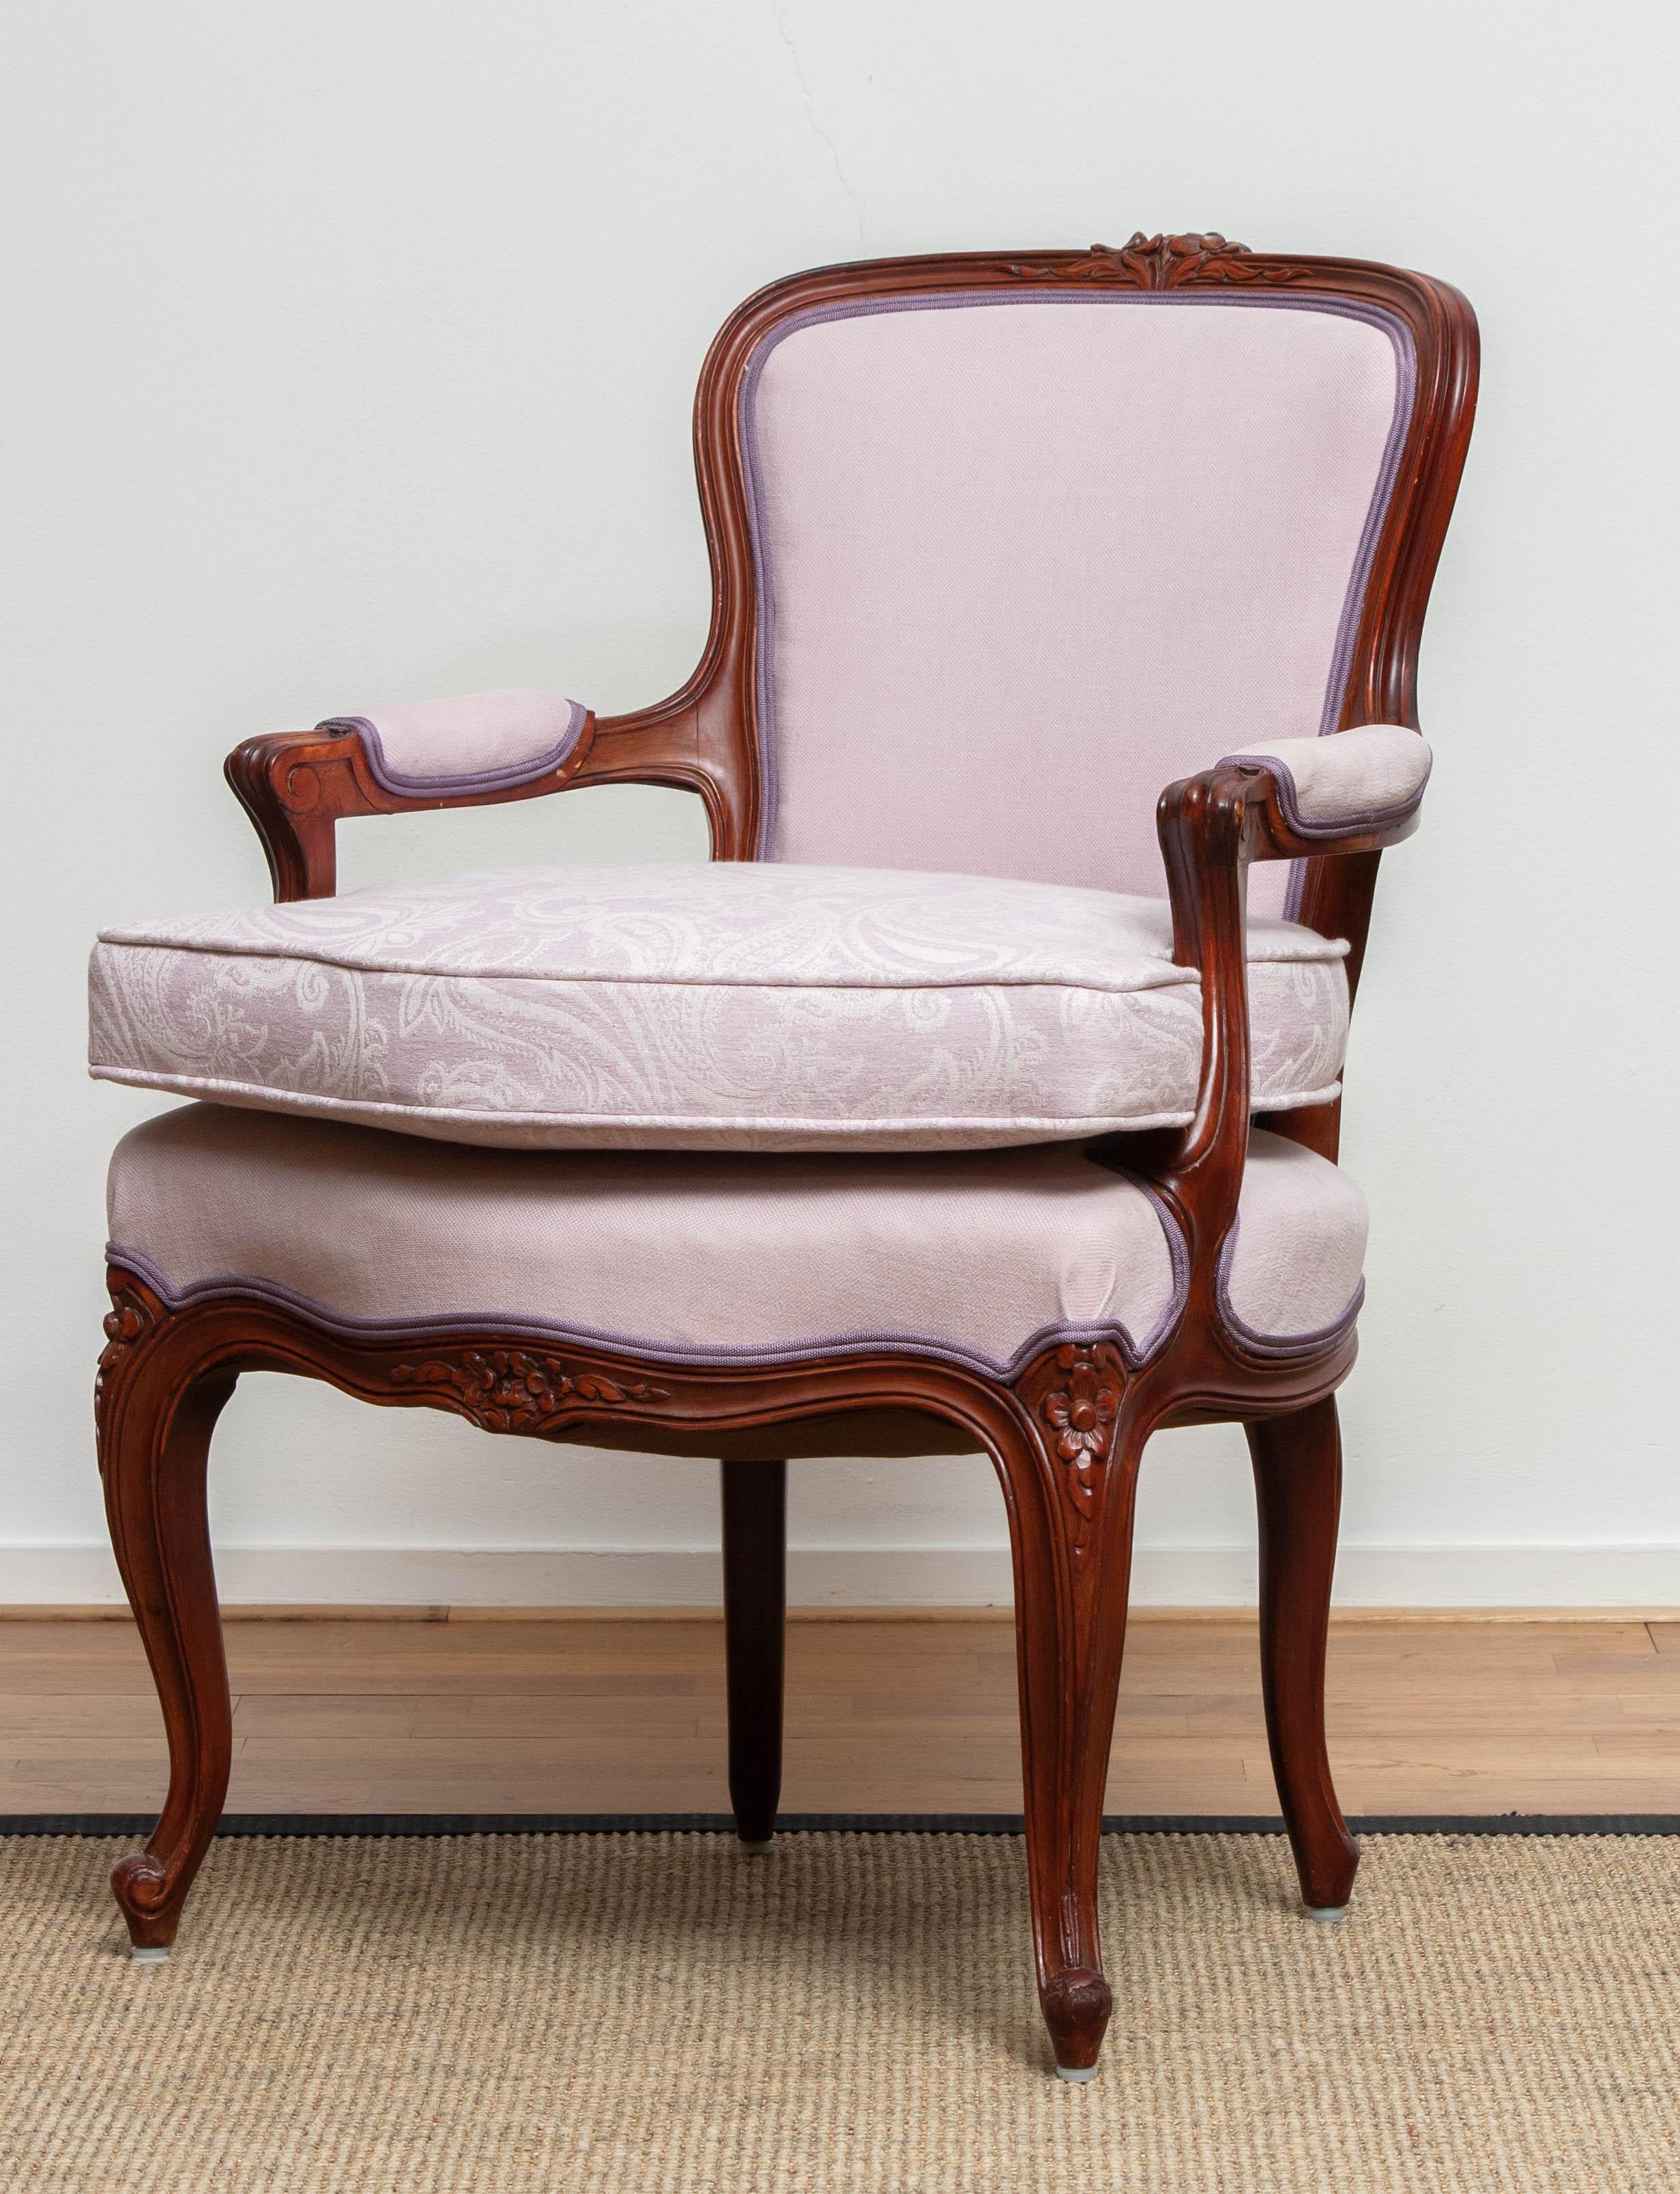 1950 Pair of Pink Swedish Rococo Bergères in the Shabby Chic Technique Chairs F 4